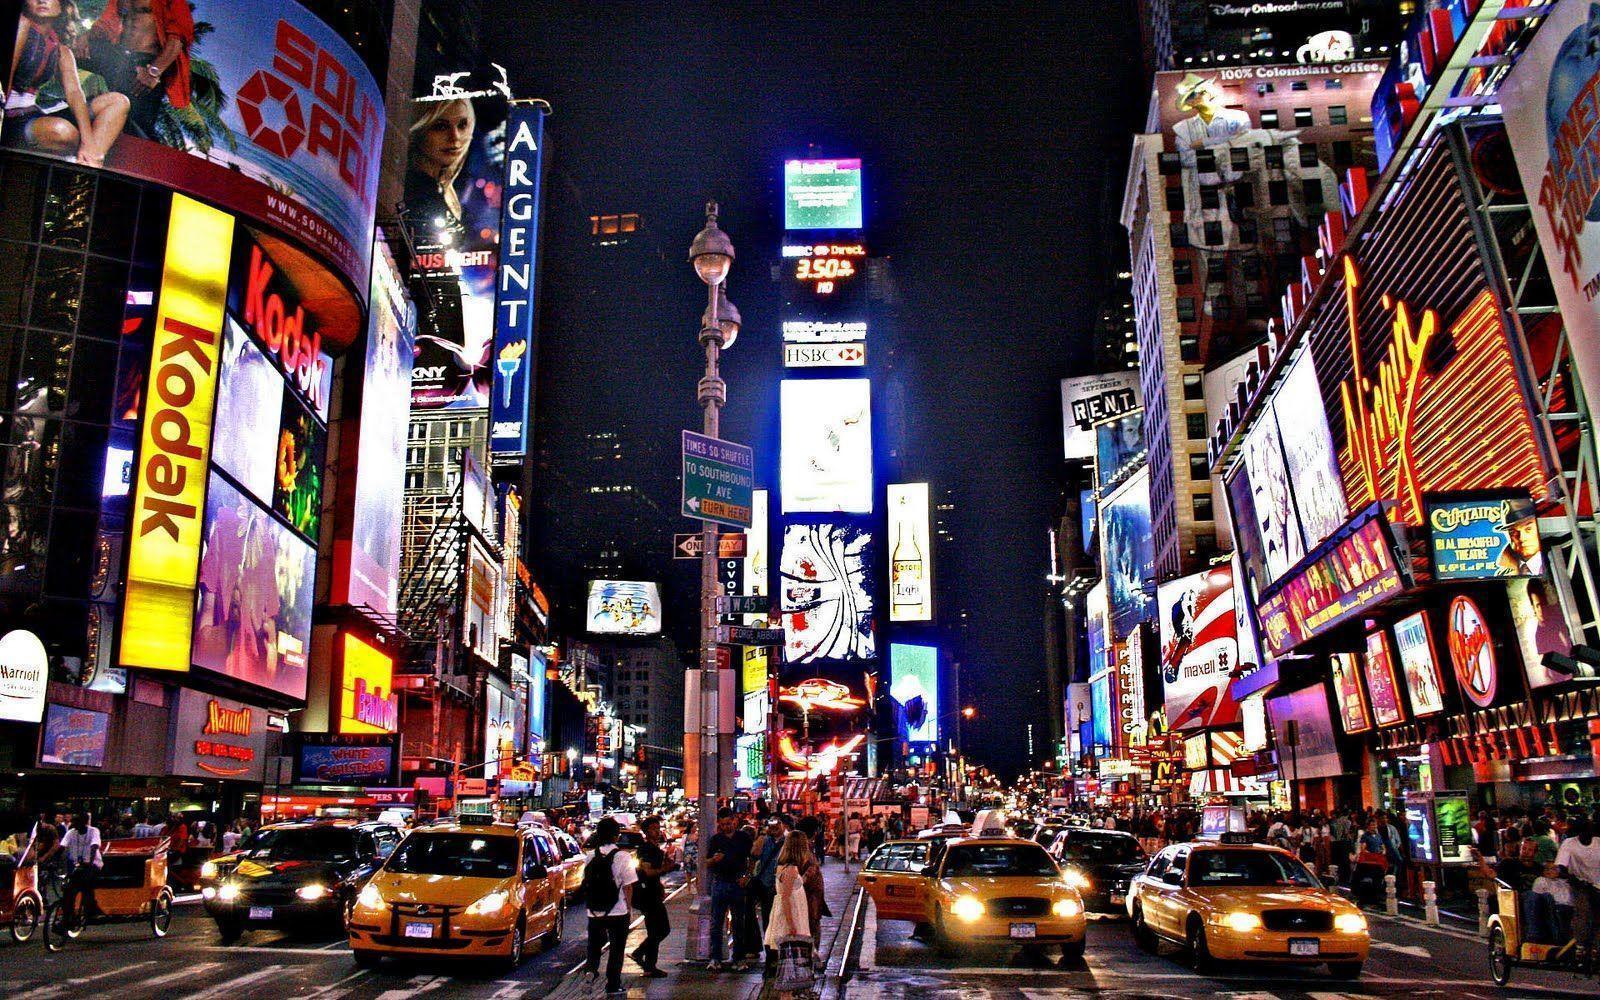 New York Live Wallpaper APK (Android App) - Free Download